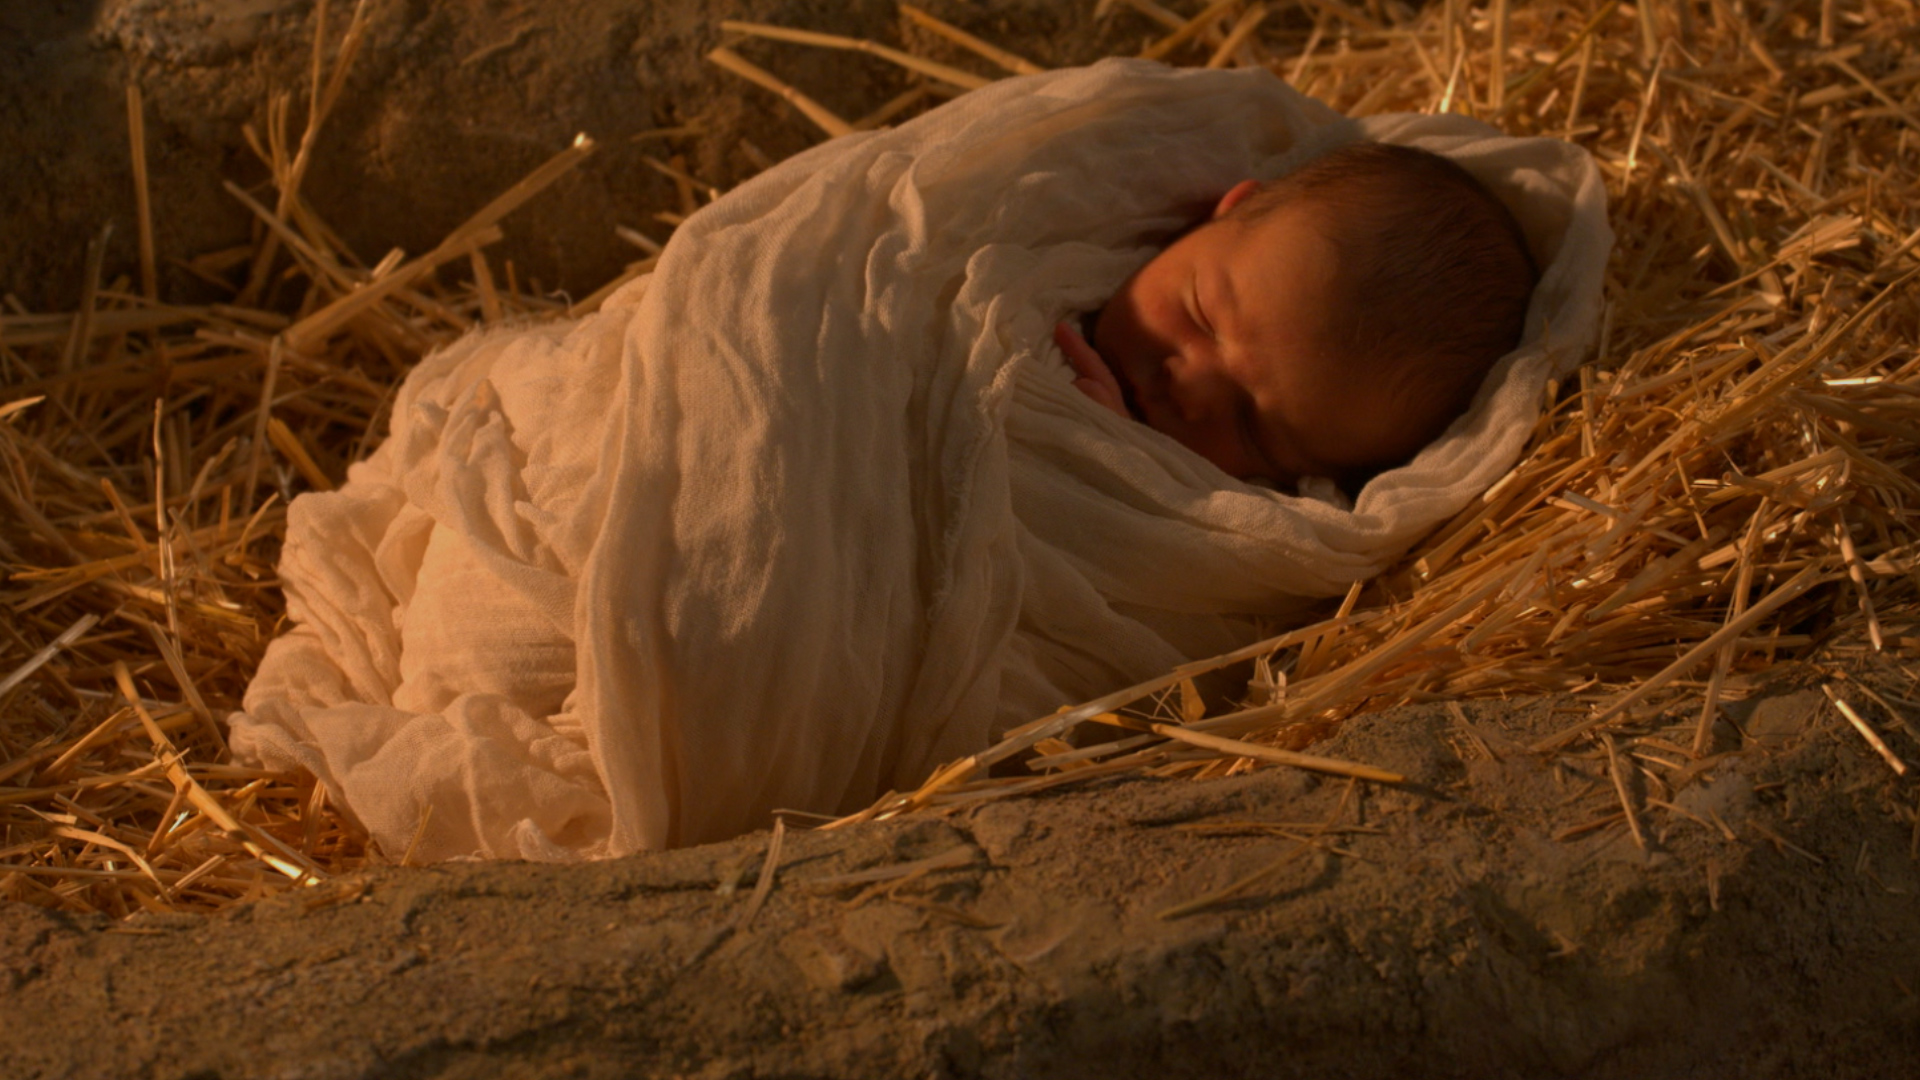 Baby Jesus wrapped in cloth in the manger